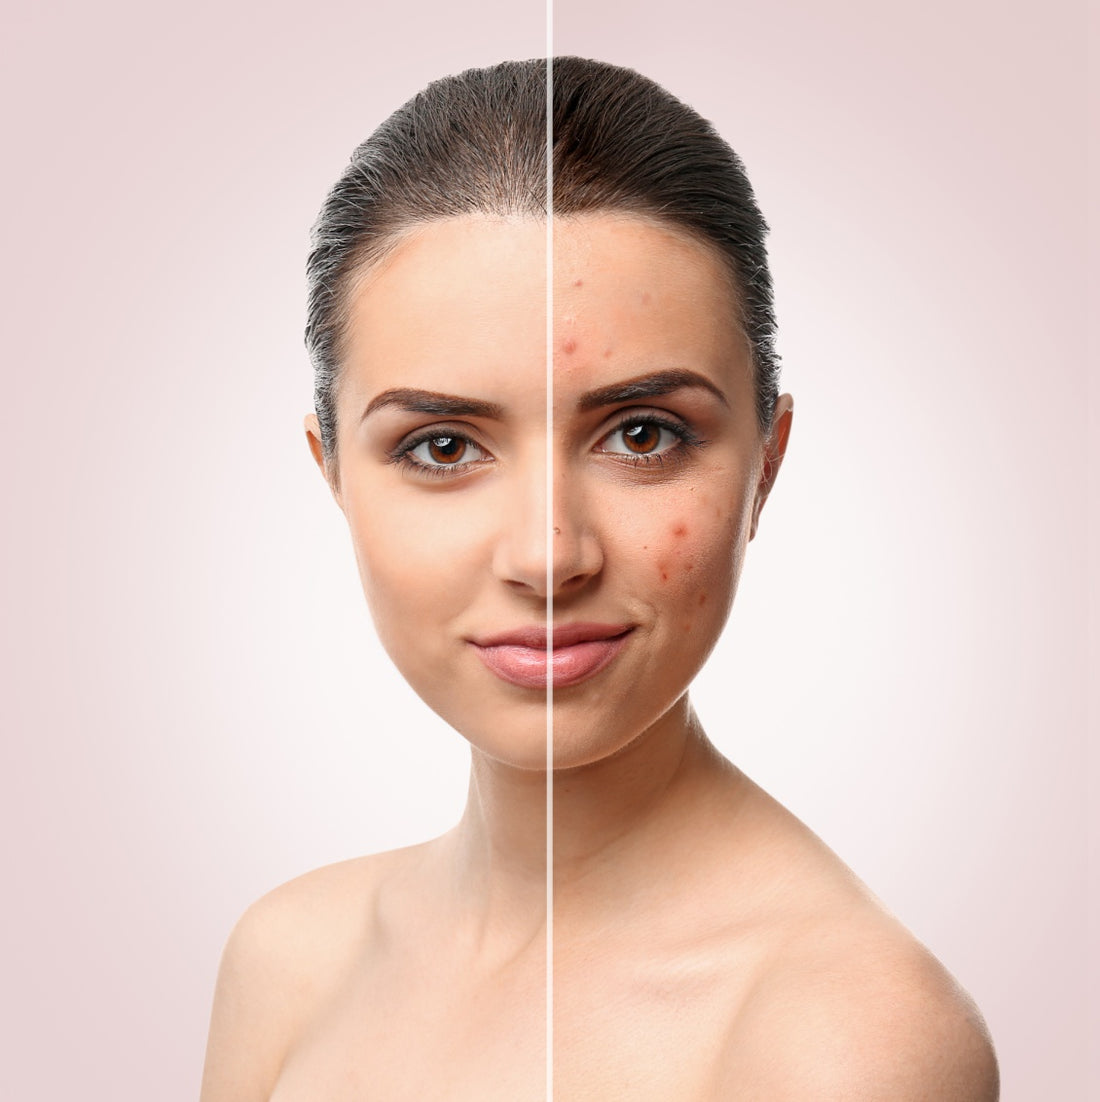 LIFESTYLE CHANGES THAT CAN HELP ACNE